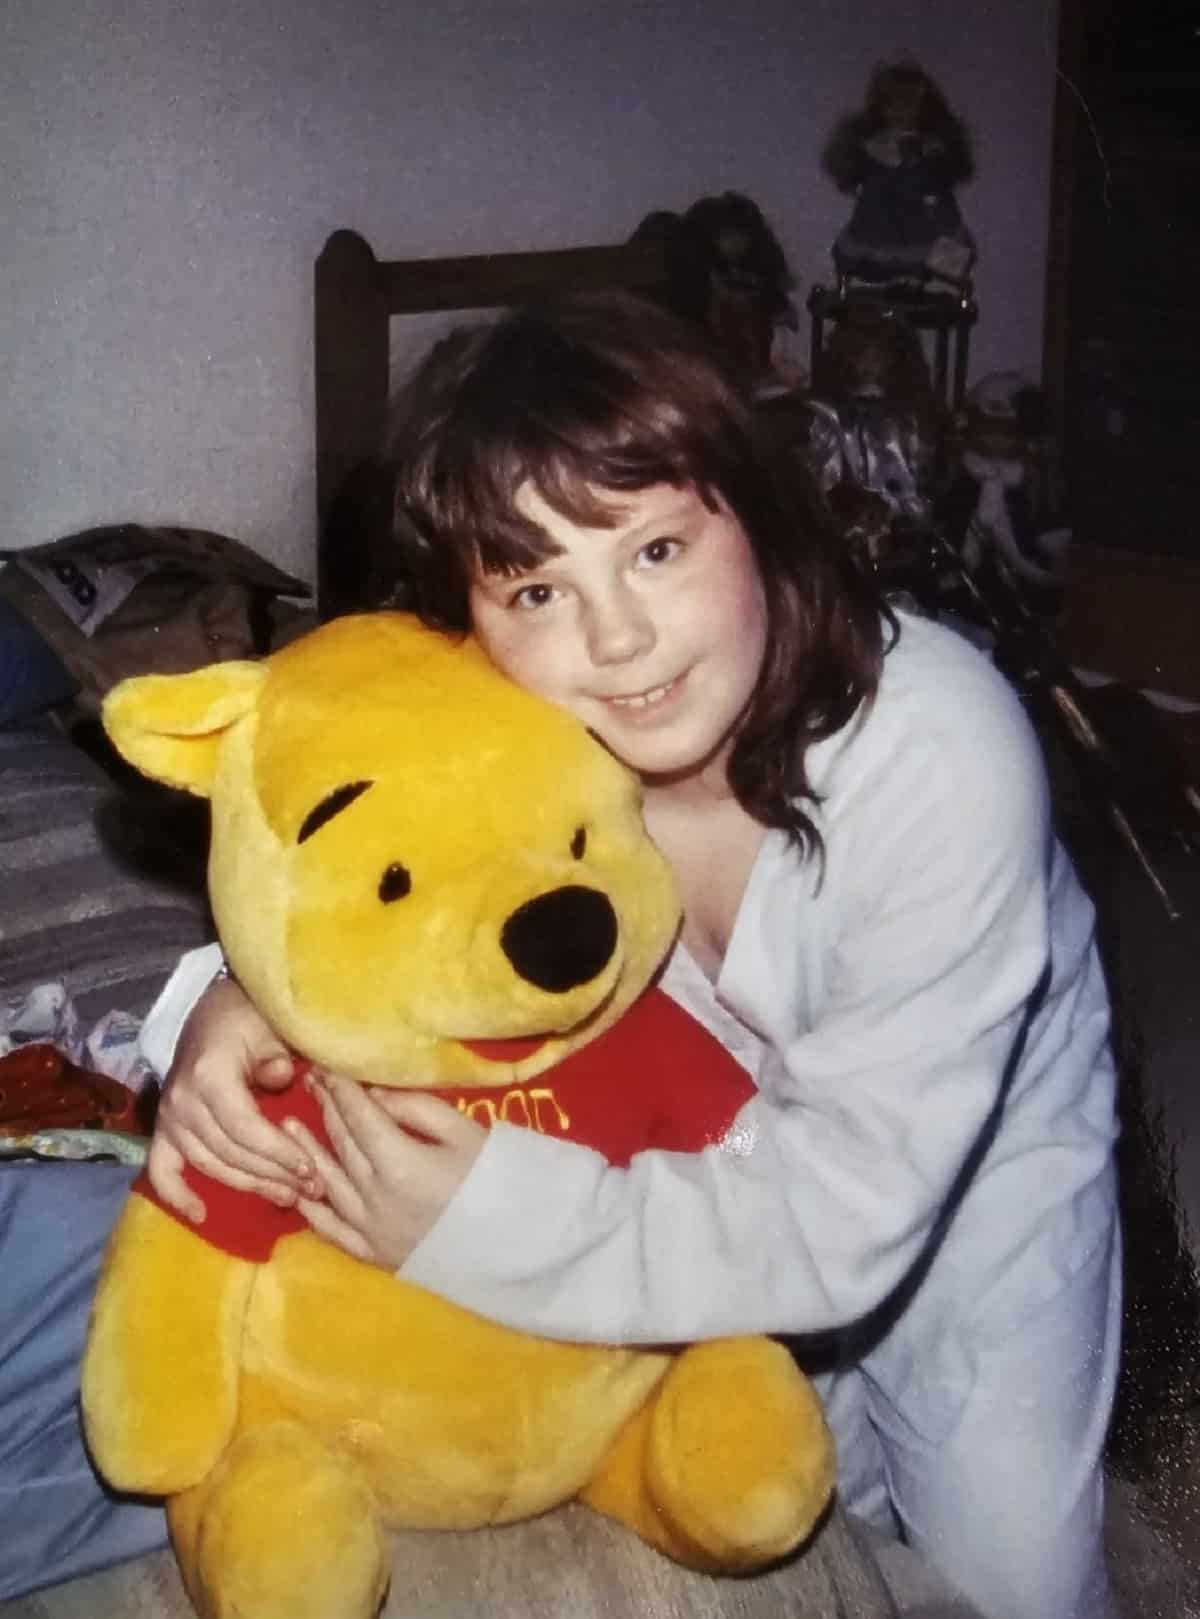 Anna, age 8, wearing white, long-sleeve pajamas while hugging a large Winnie the Pooh stuffed animal